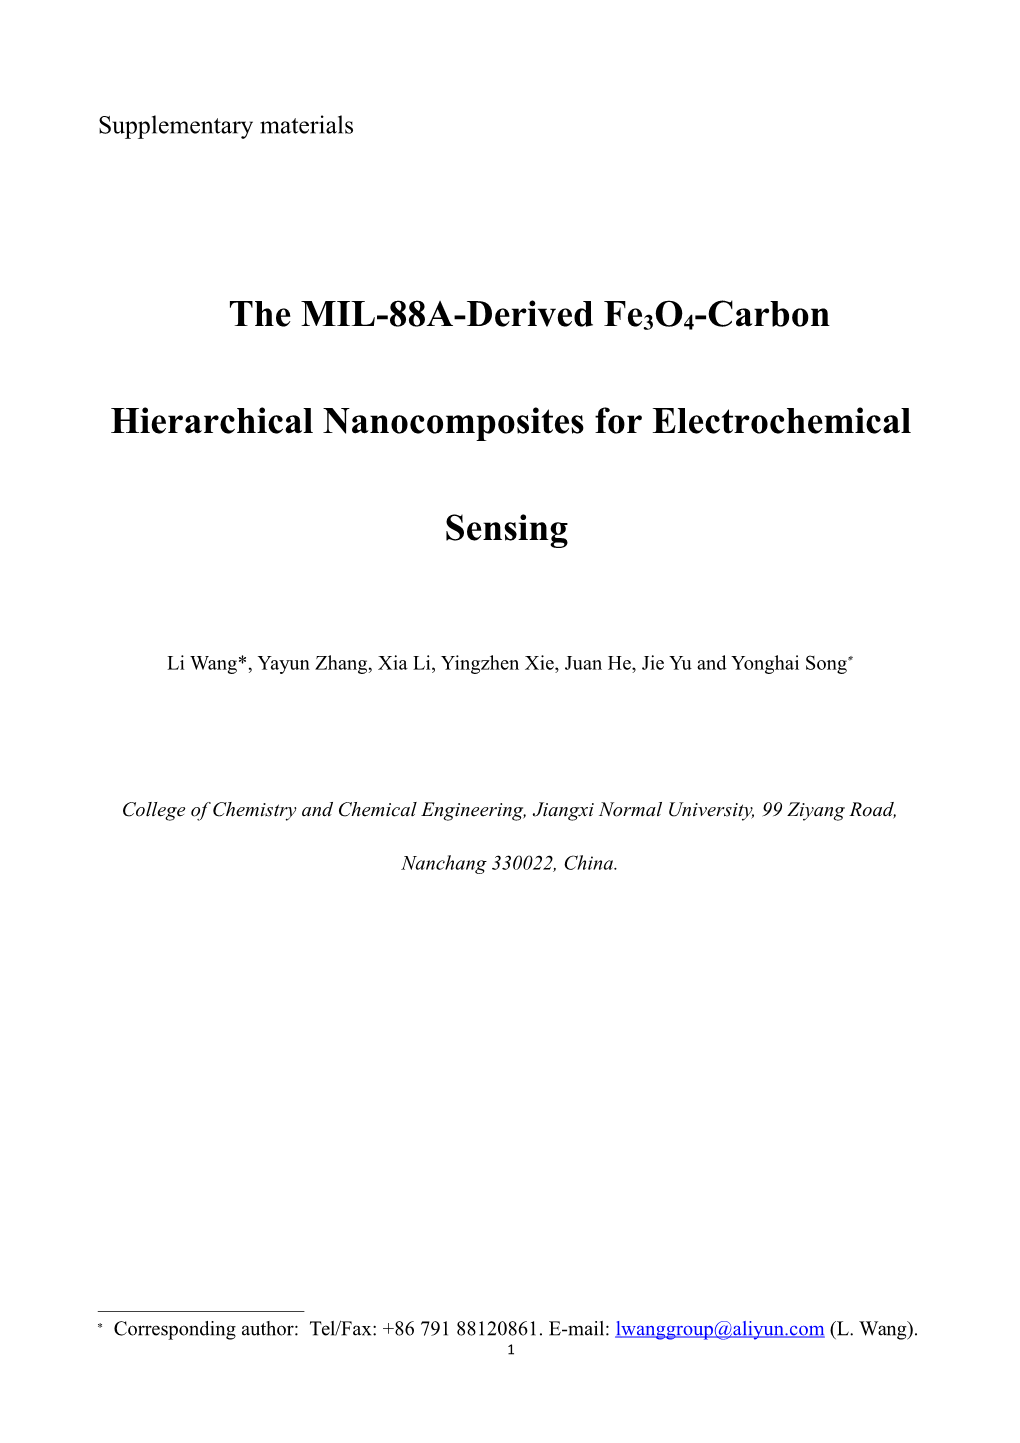 The MIL-88A-Derived Fe3o4-Carbon Hierarchical Nanocomposites for Electrochemical Sensing